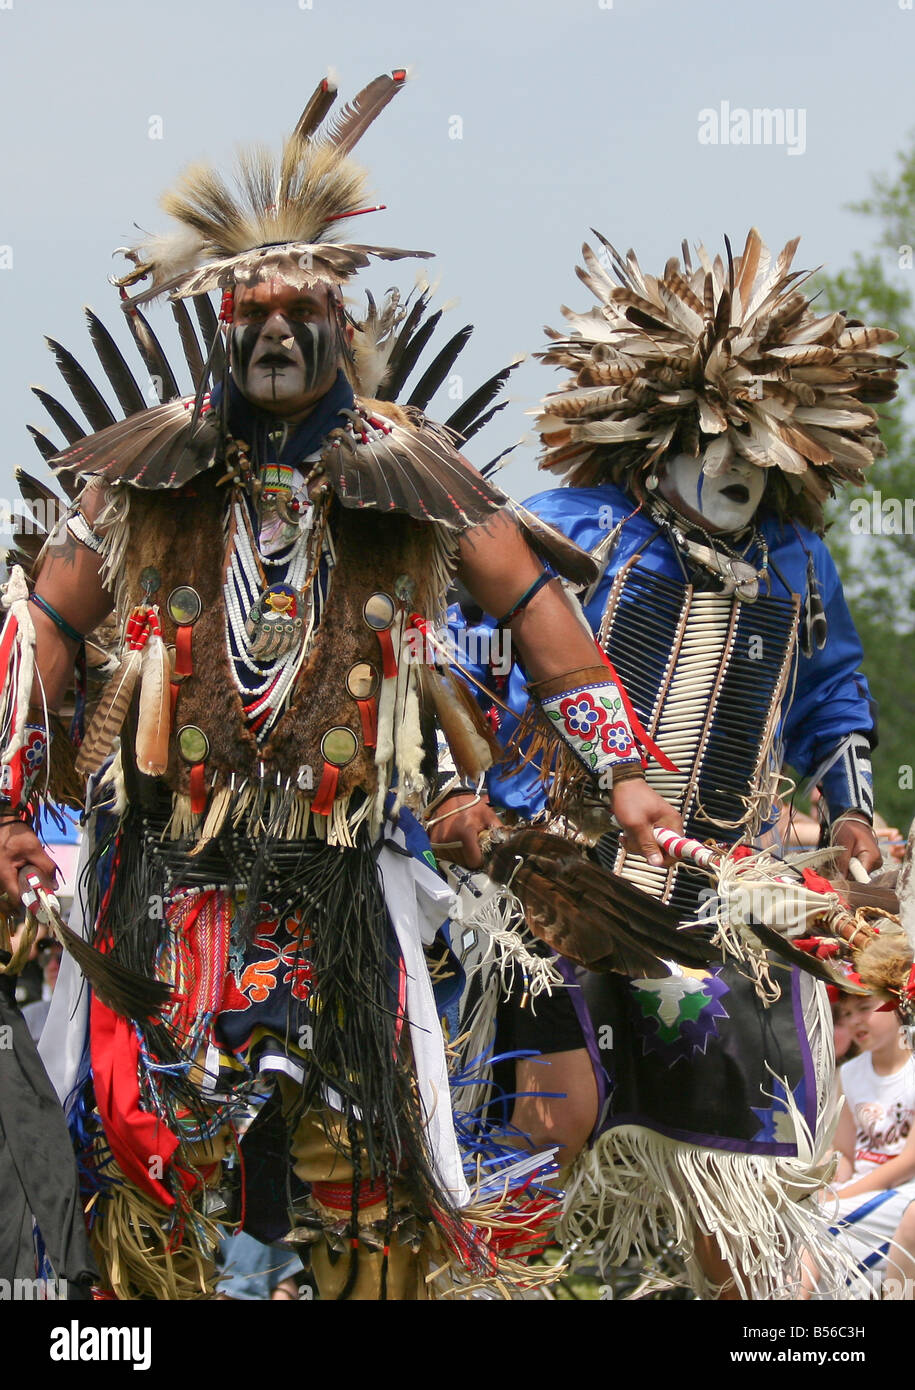 Two Native Americans dance in full traditional regalia at the 8th Annual Red Wing PowWow in Virginia Beach, Virginia Stock Photo